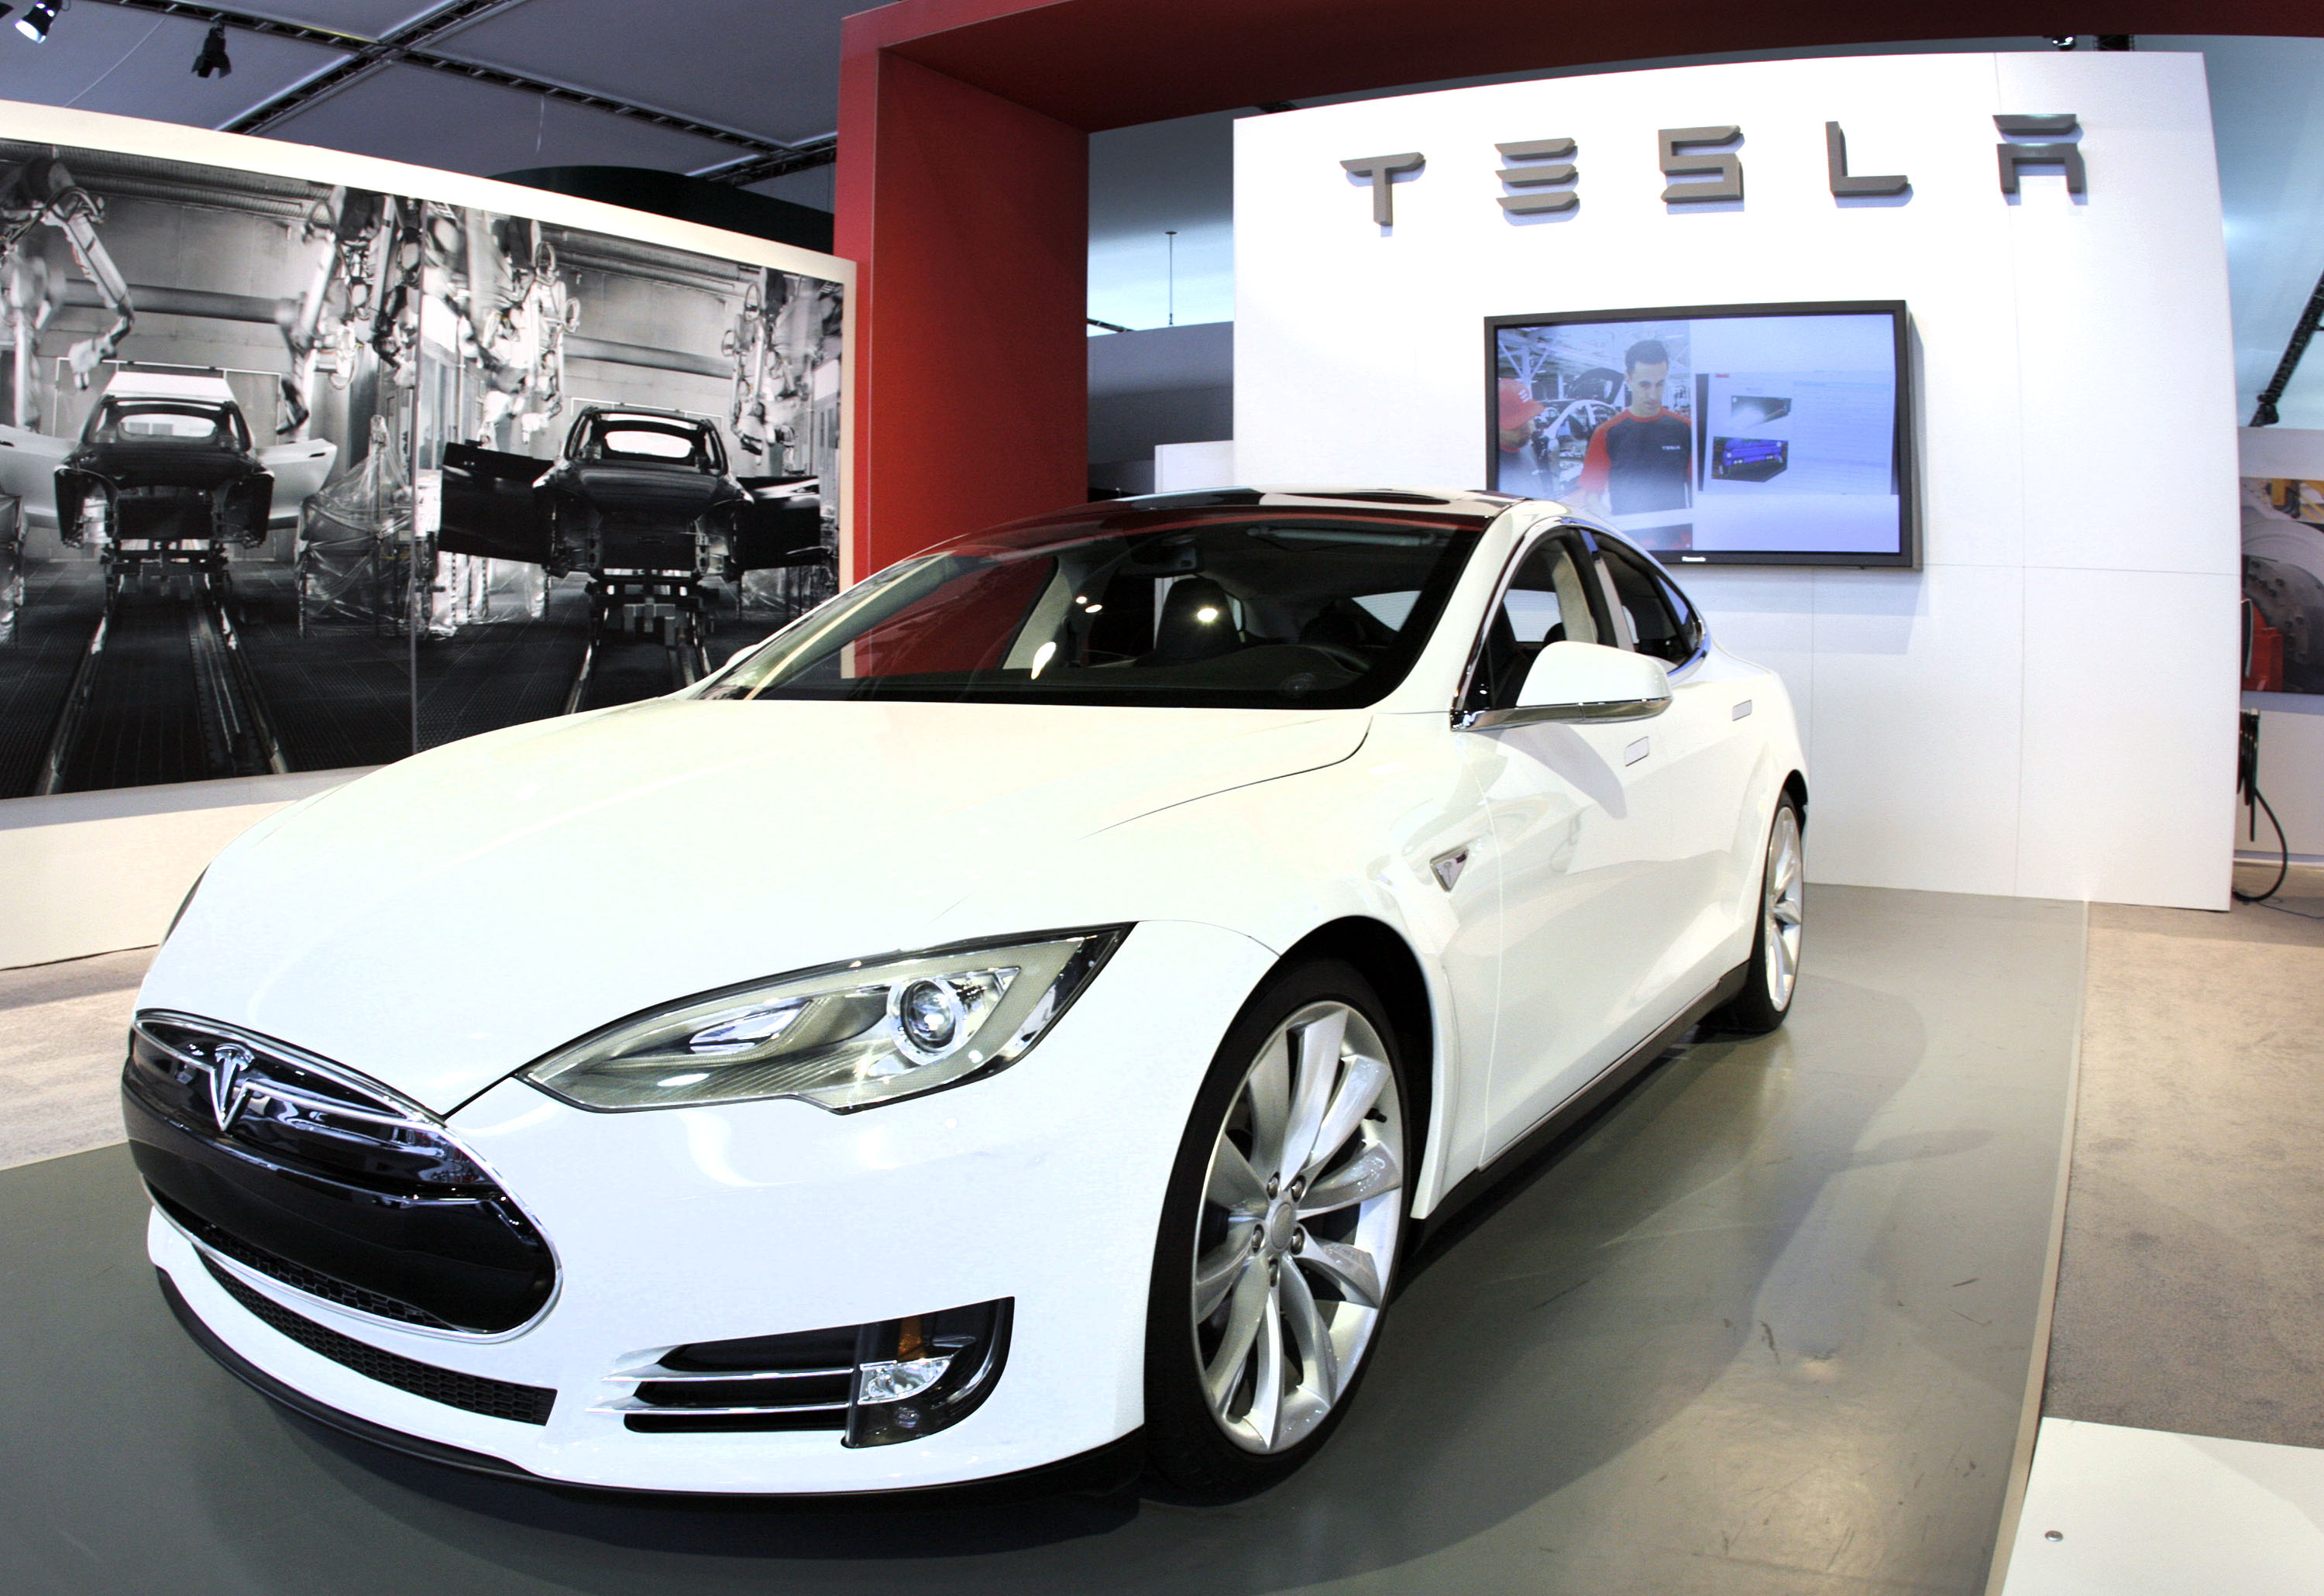 The Tesla Model S Signature is shown during a media preview day at the 2012 North American International Auto Show January 10, 2012 in Detroit, Michigan. (Bill Pugliano&mdash;Getty Images)